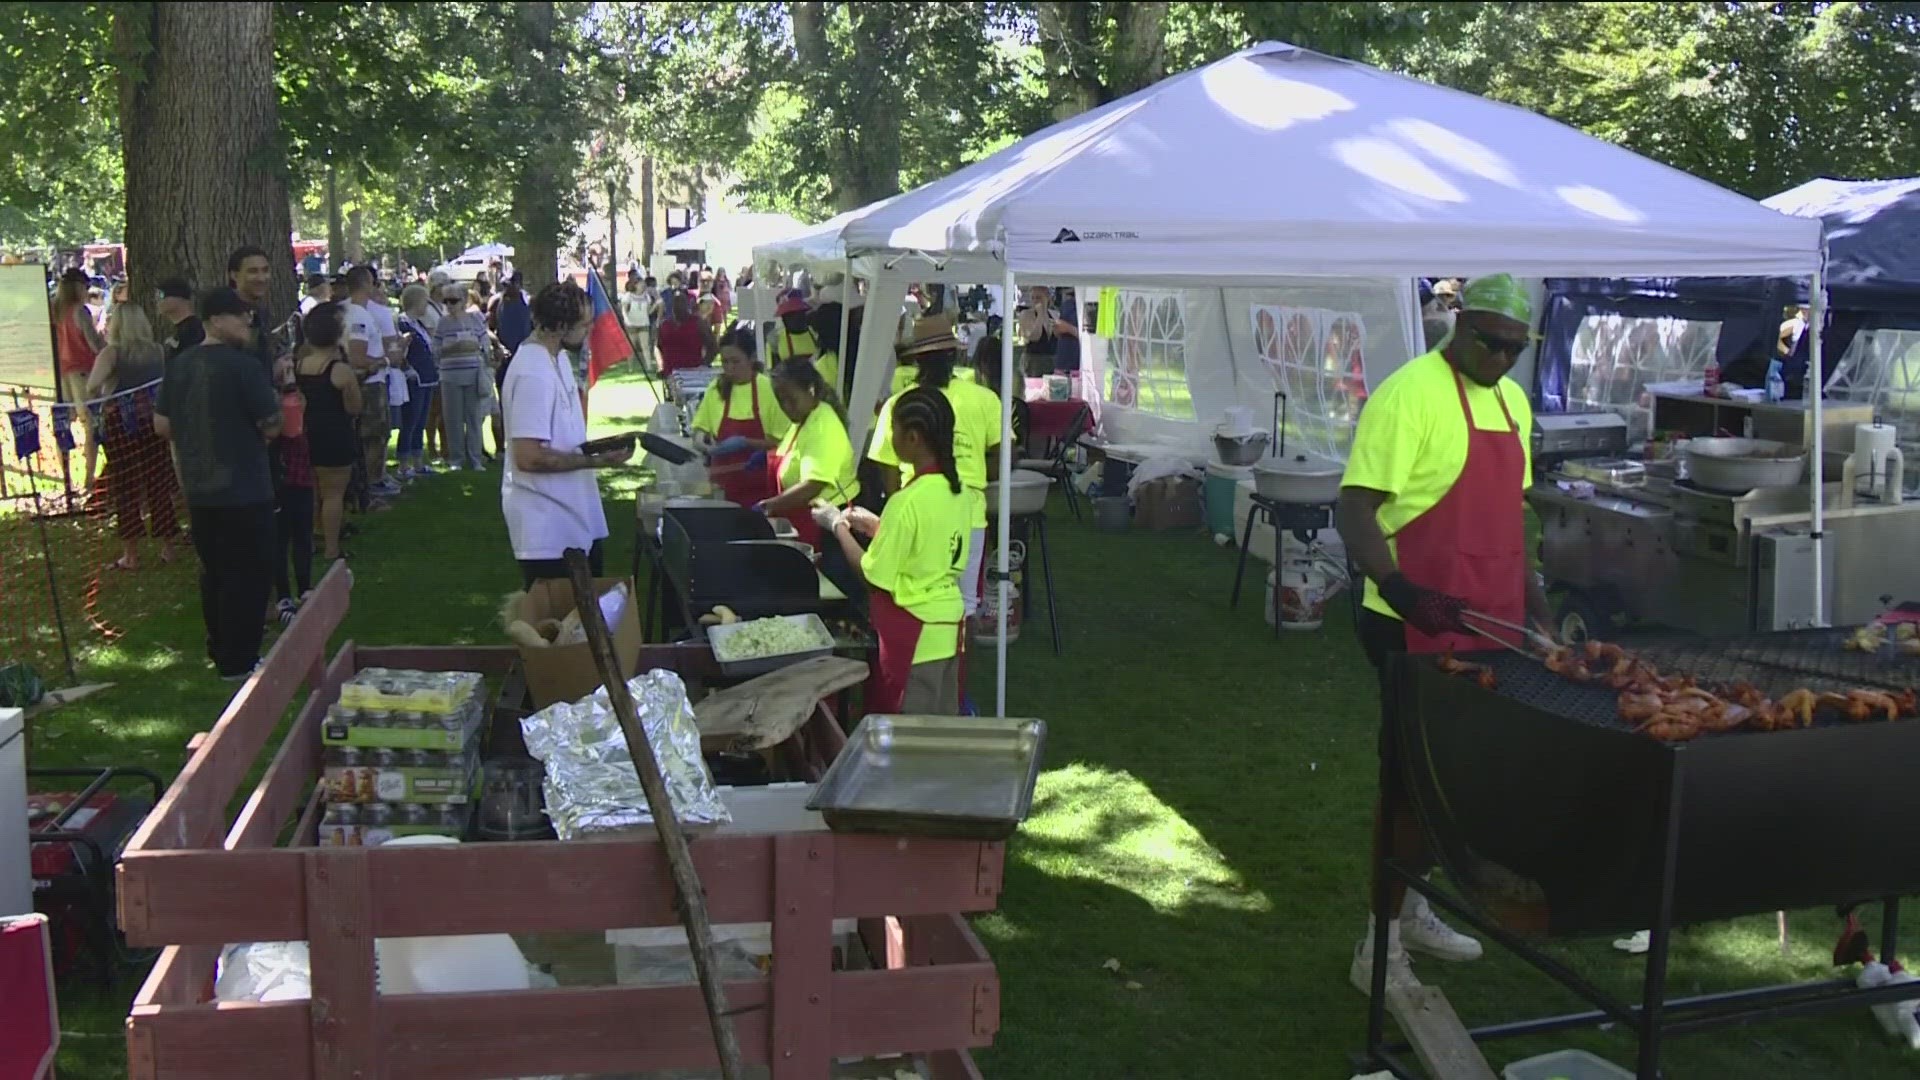 This year's festival includes 42 food trucks, a variety of retail vendors, community supporters, live entertainment and more. The event runs until 8 p.m. Saturday.